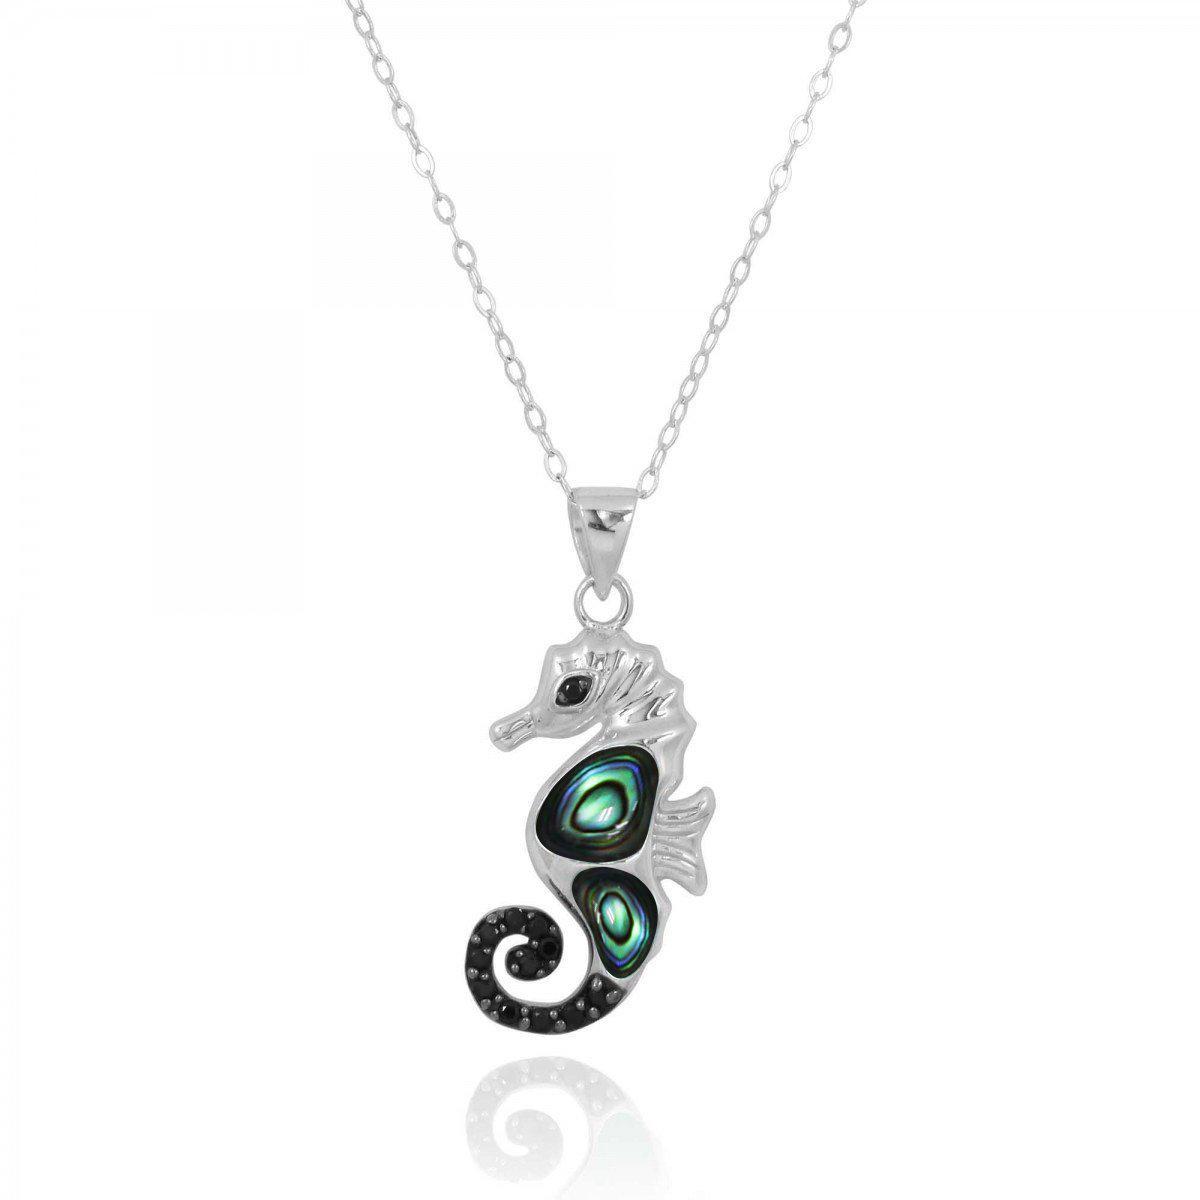 SeaHorse Pendant Necklace with Abalone Shell and Black Spinel